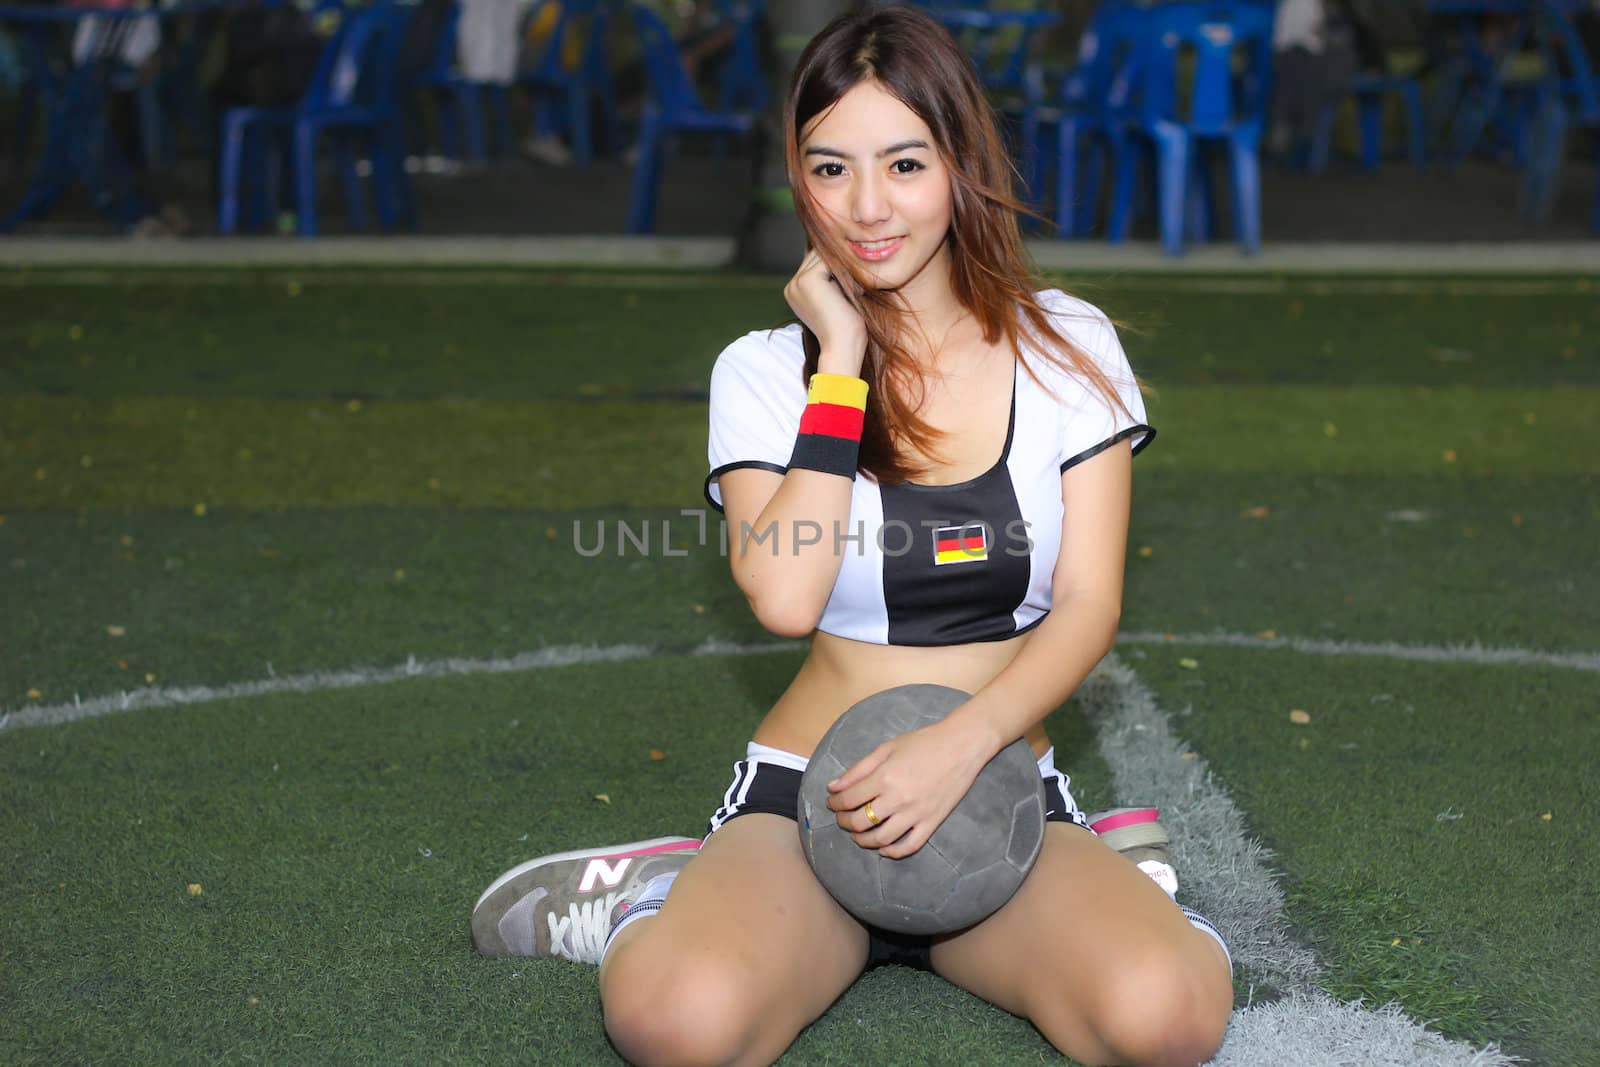 BANGKOK, THAILAND - JUNE 29, 2014: Unidentified model with Germany  costume pose for promote World Cup 2014 in futsal park on June 29, 2014 in Bangkok, Thailand.